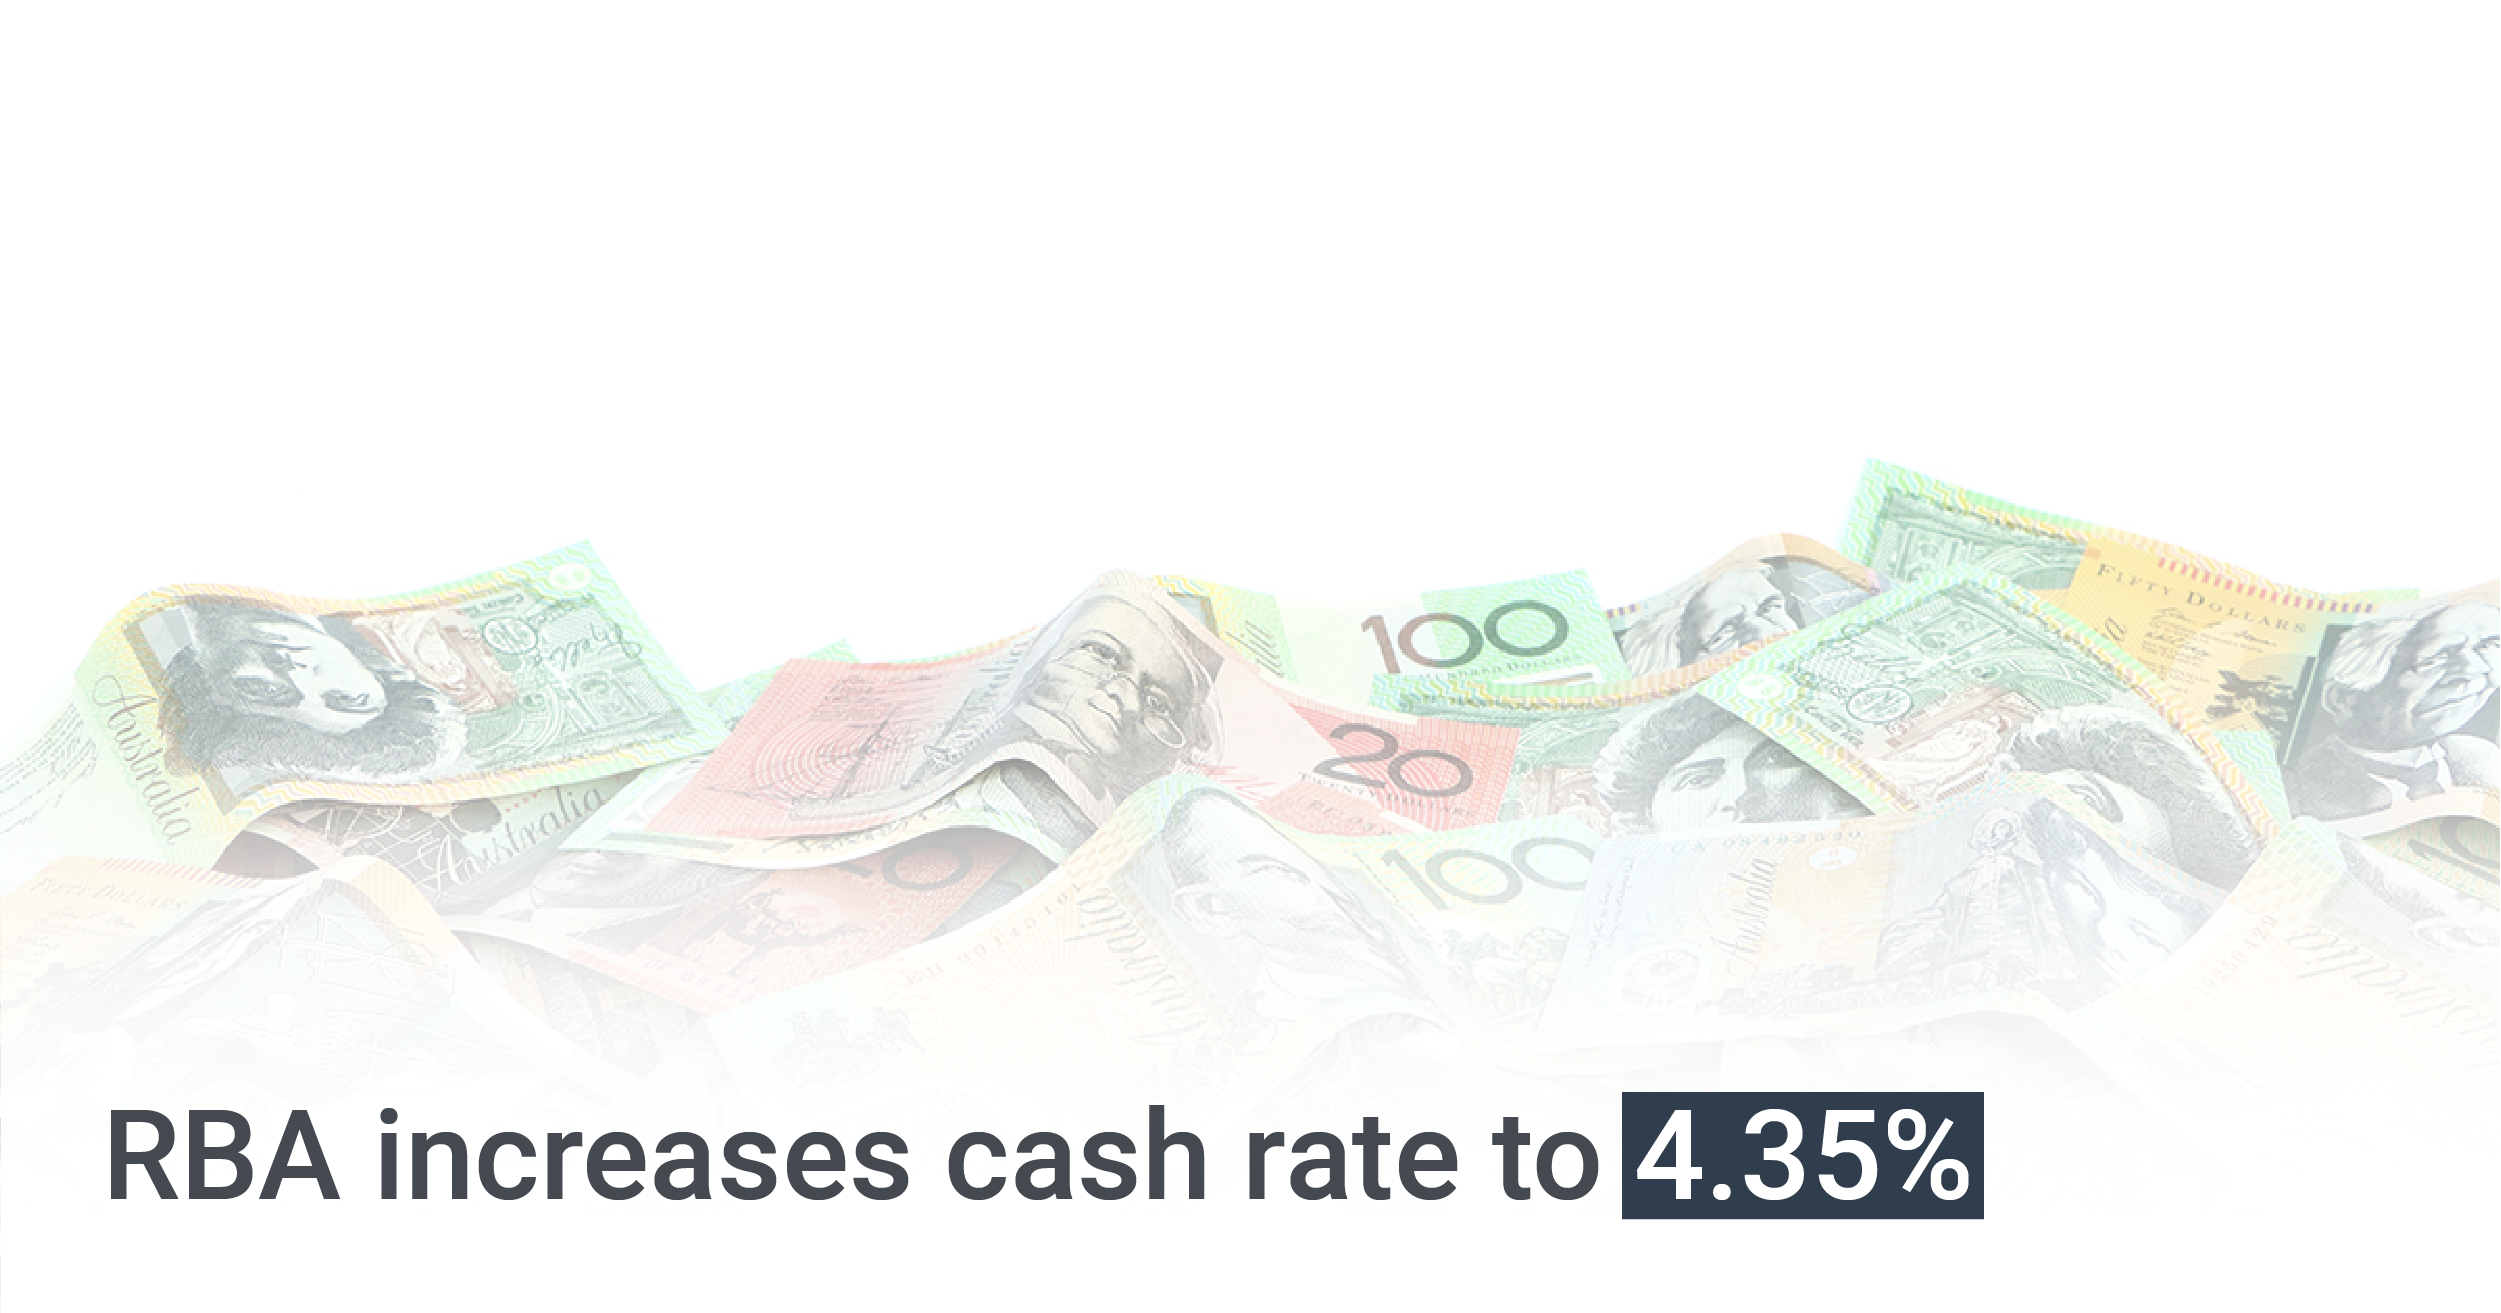 Reserve Bank of Australia (RBA) increased the cash rate from 4.10% to 4.35%